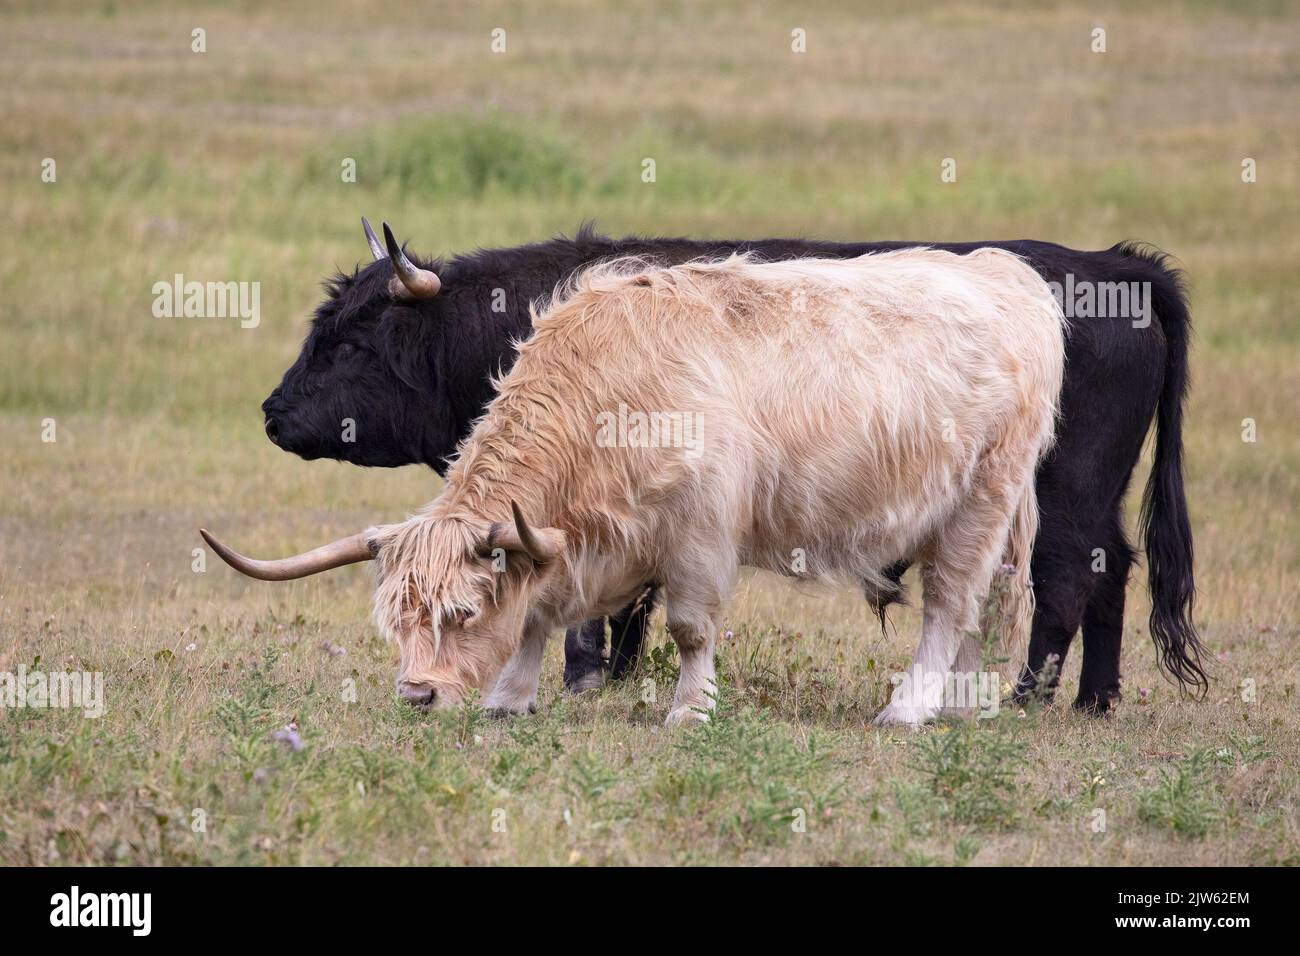 Two cattle grazing in a field, Highland cow and Highland bull Stock Photo